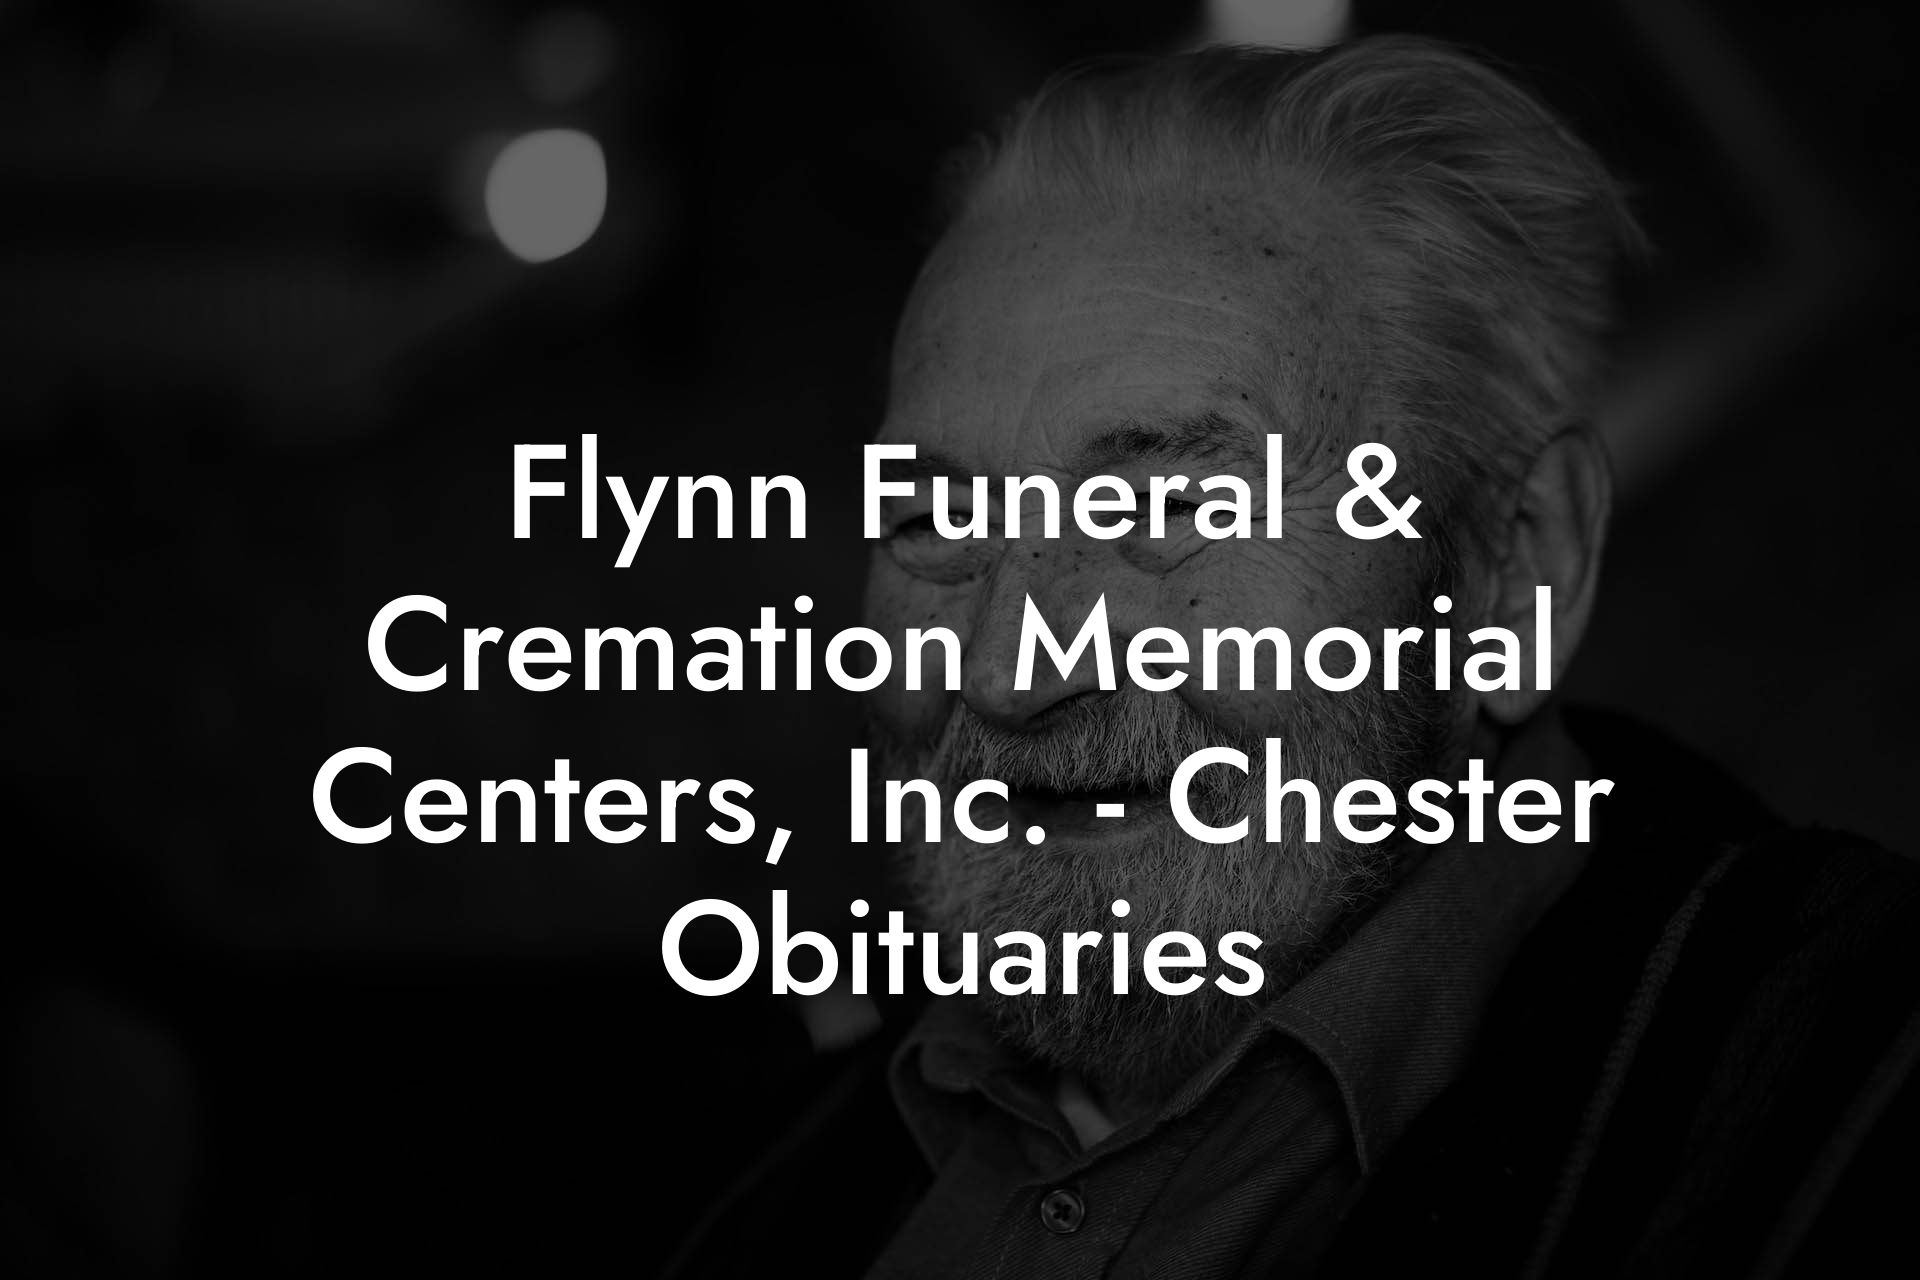 Flynn Funeral & Cremation Memorial Centers, Inc. - Chester Obituaries